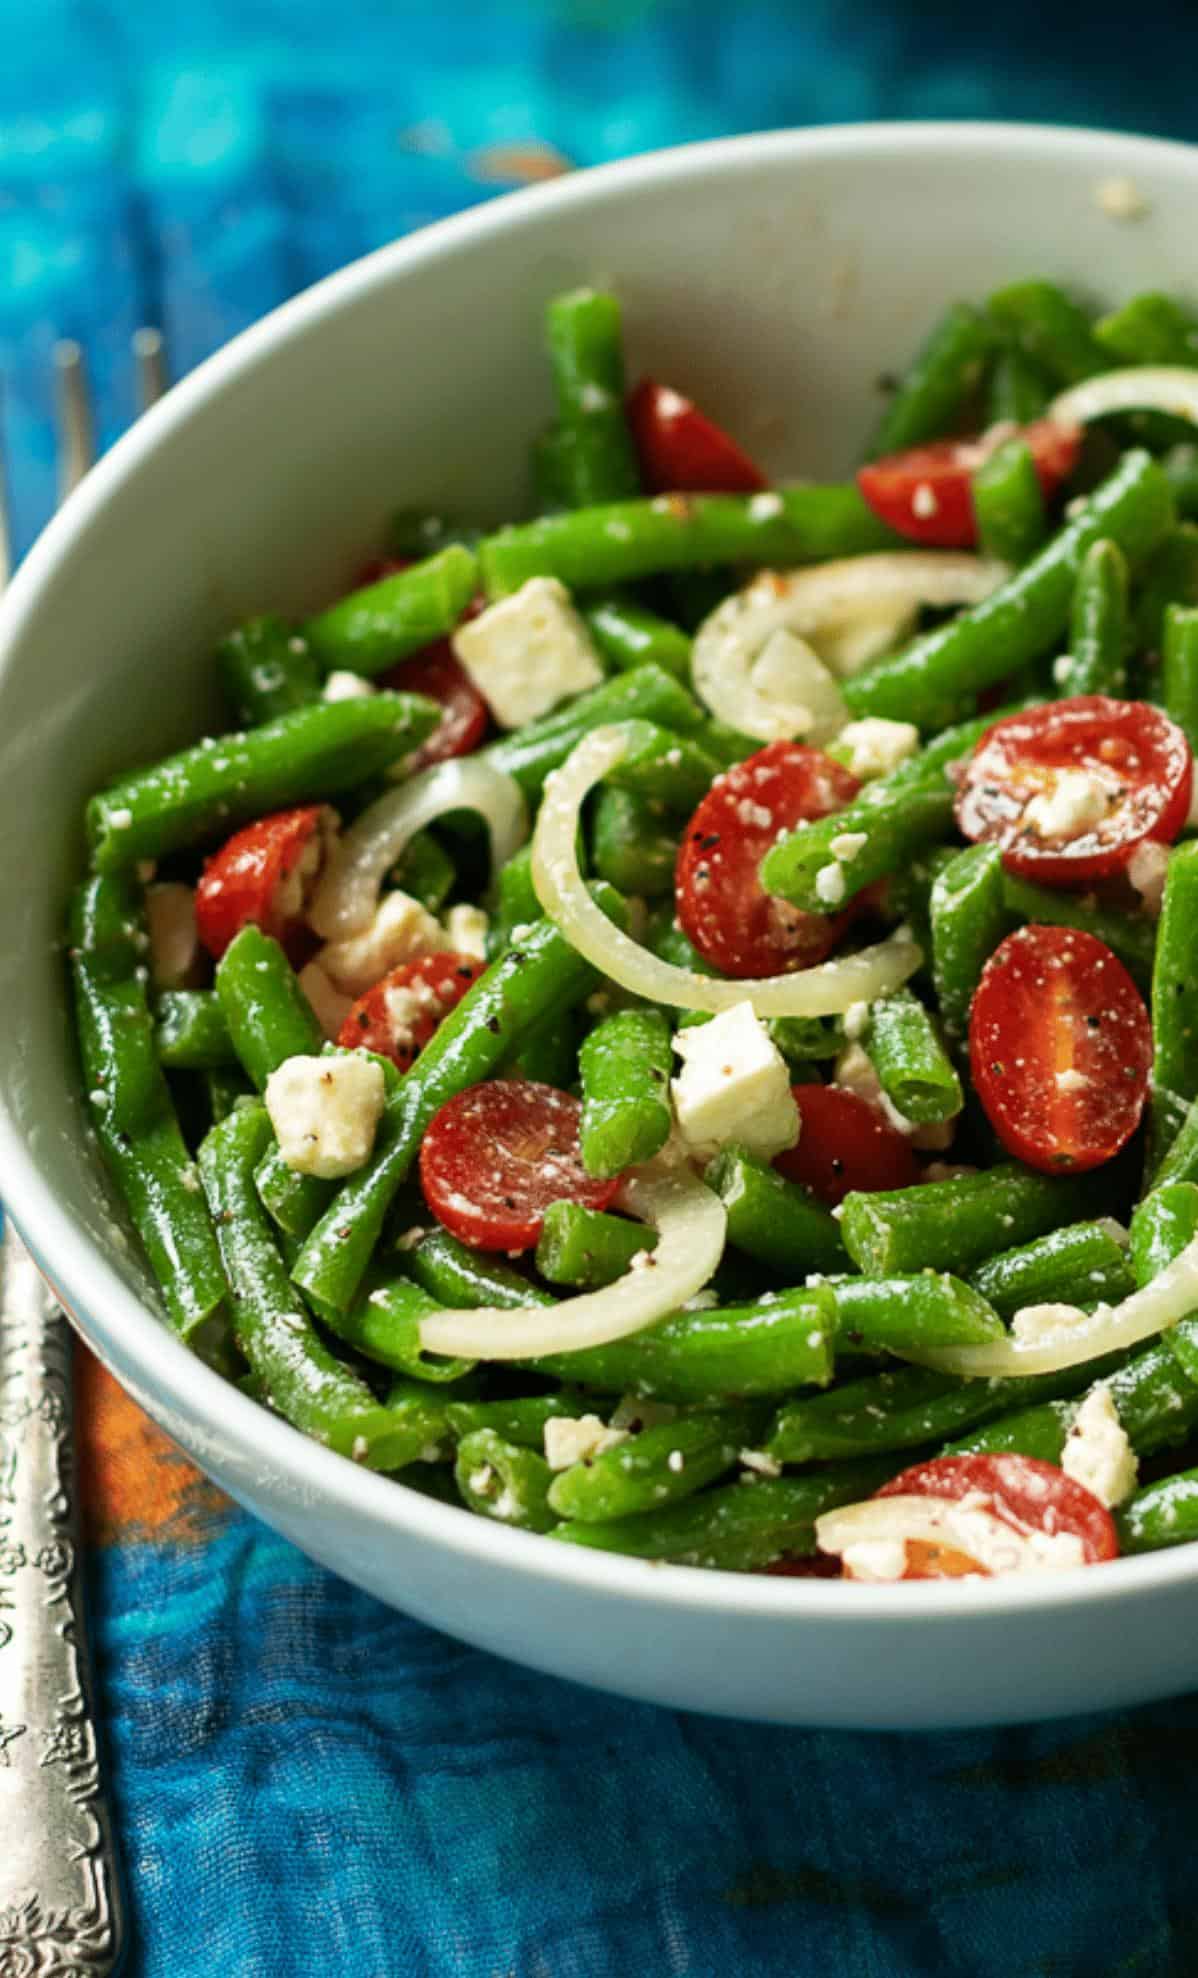  This salad is the perfect way to get in your daily dose of veggies.